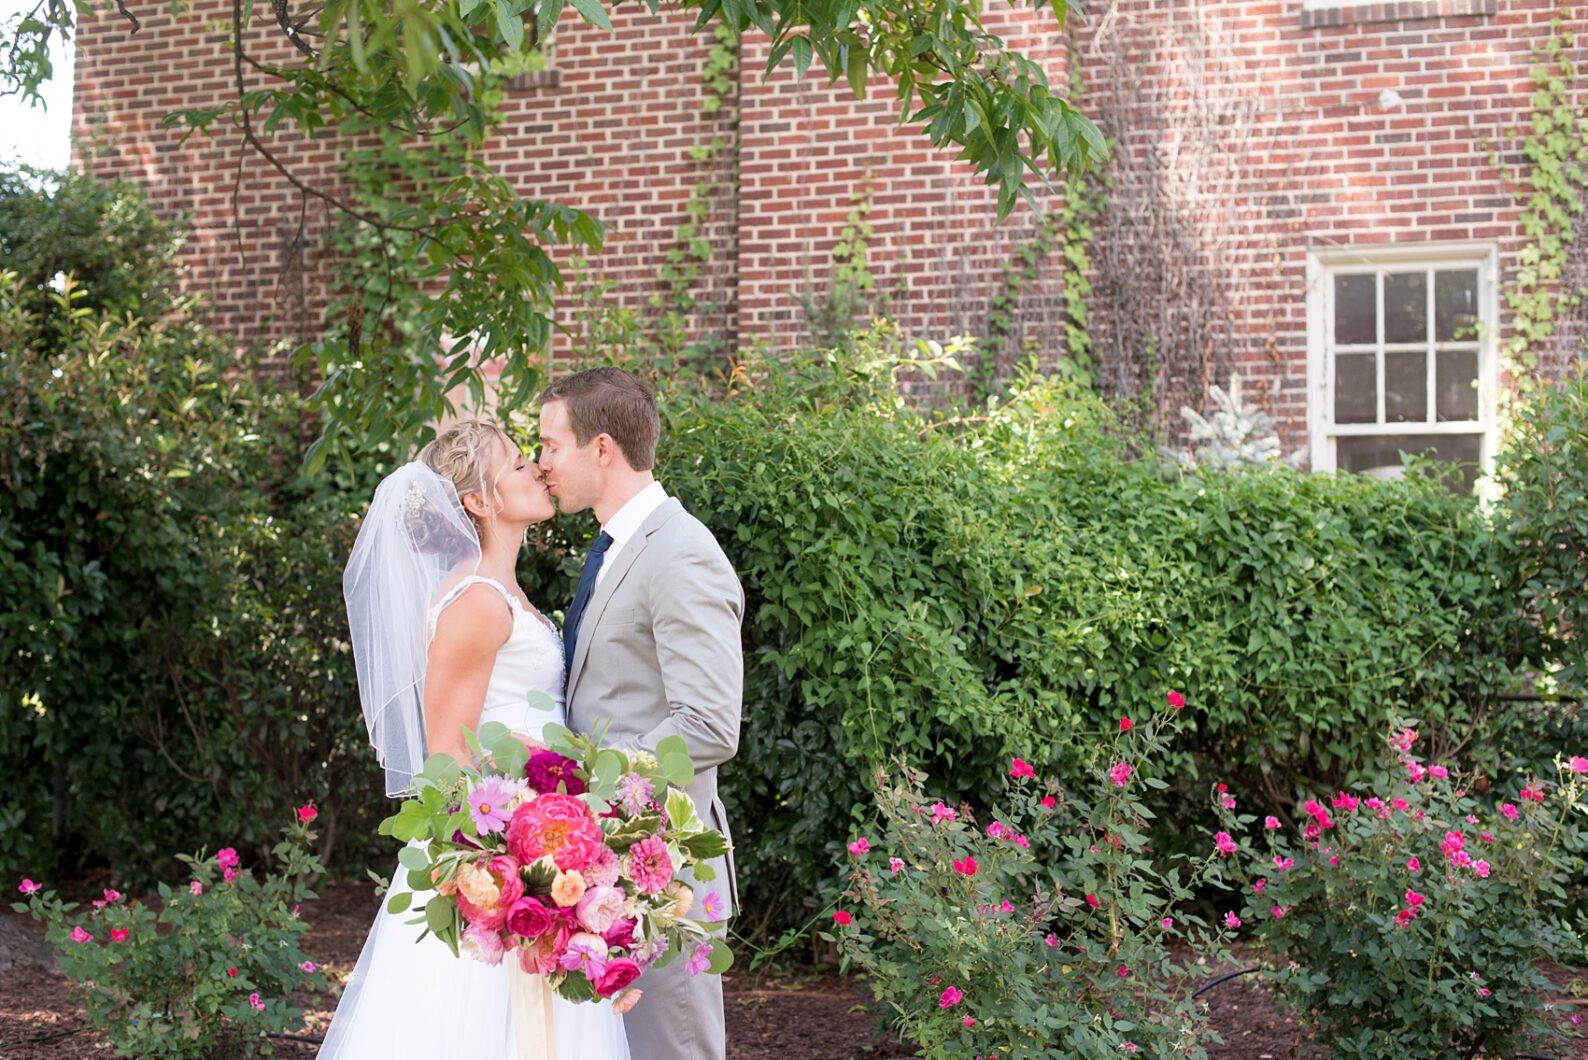 Mikkel Paige Photography photos of a wedding at The Merrimon-Wynne House in downtown Raleigh.